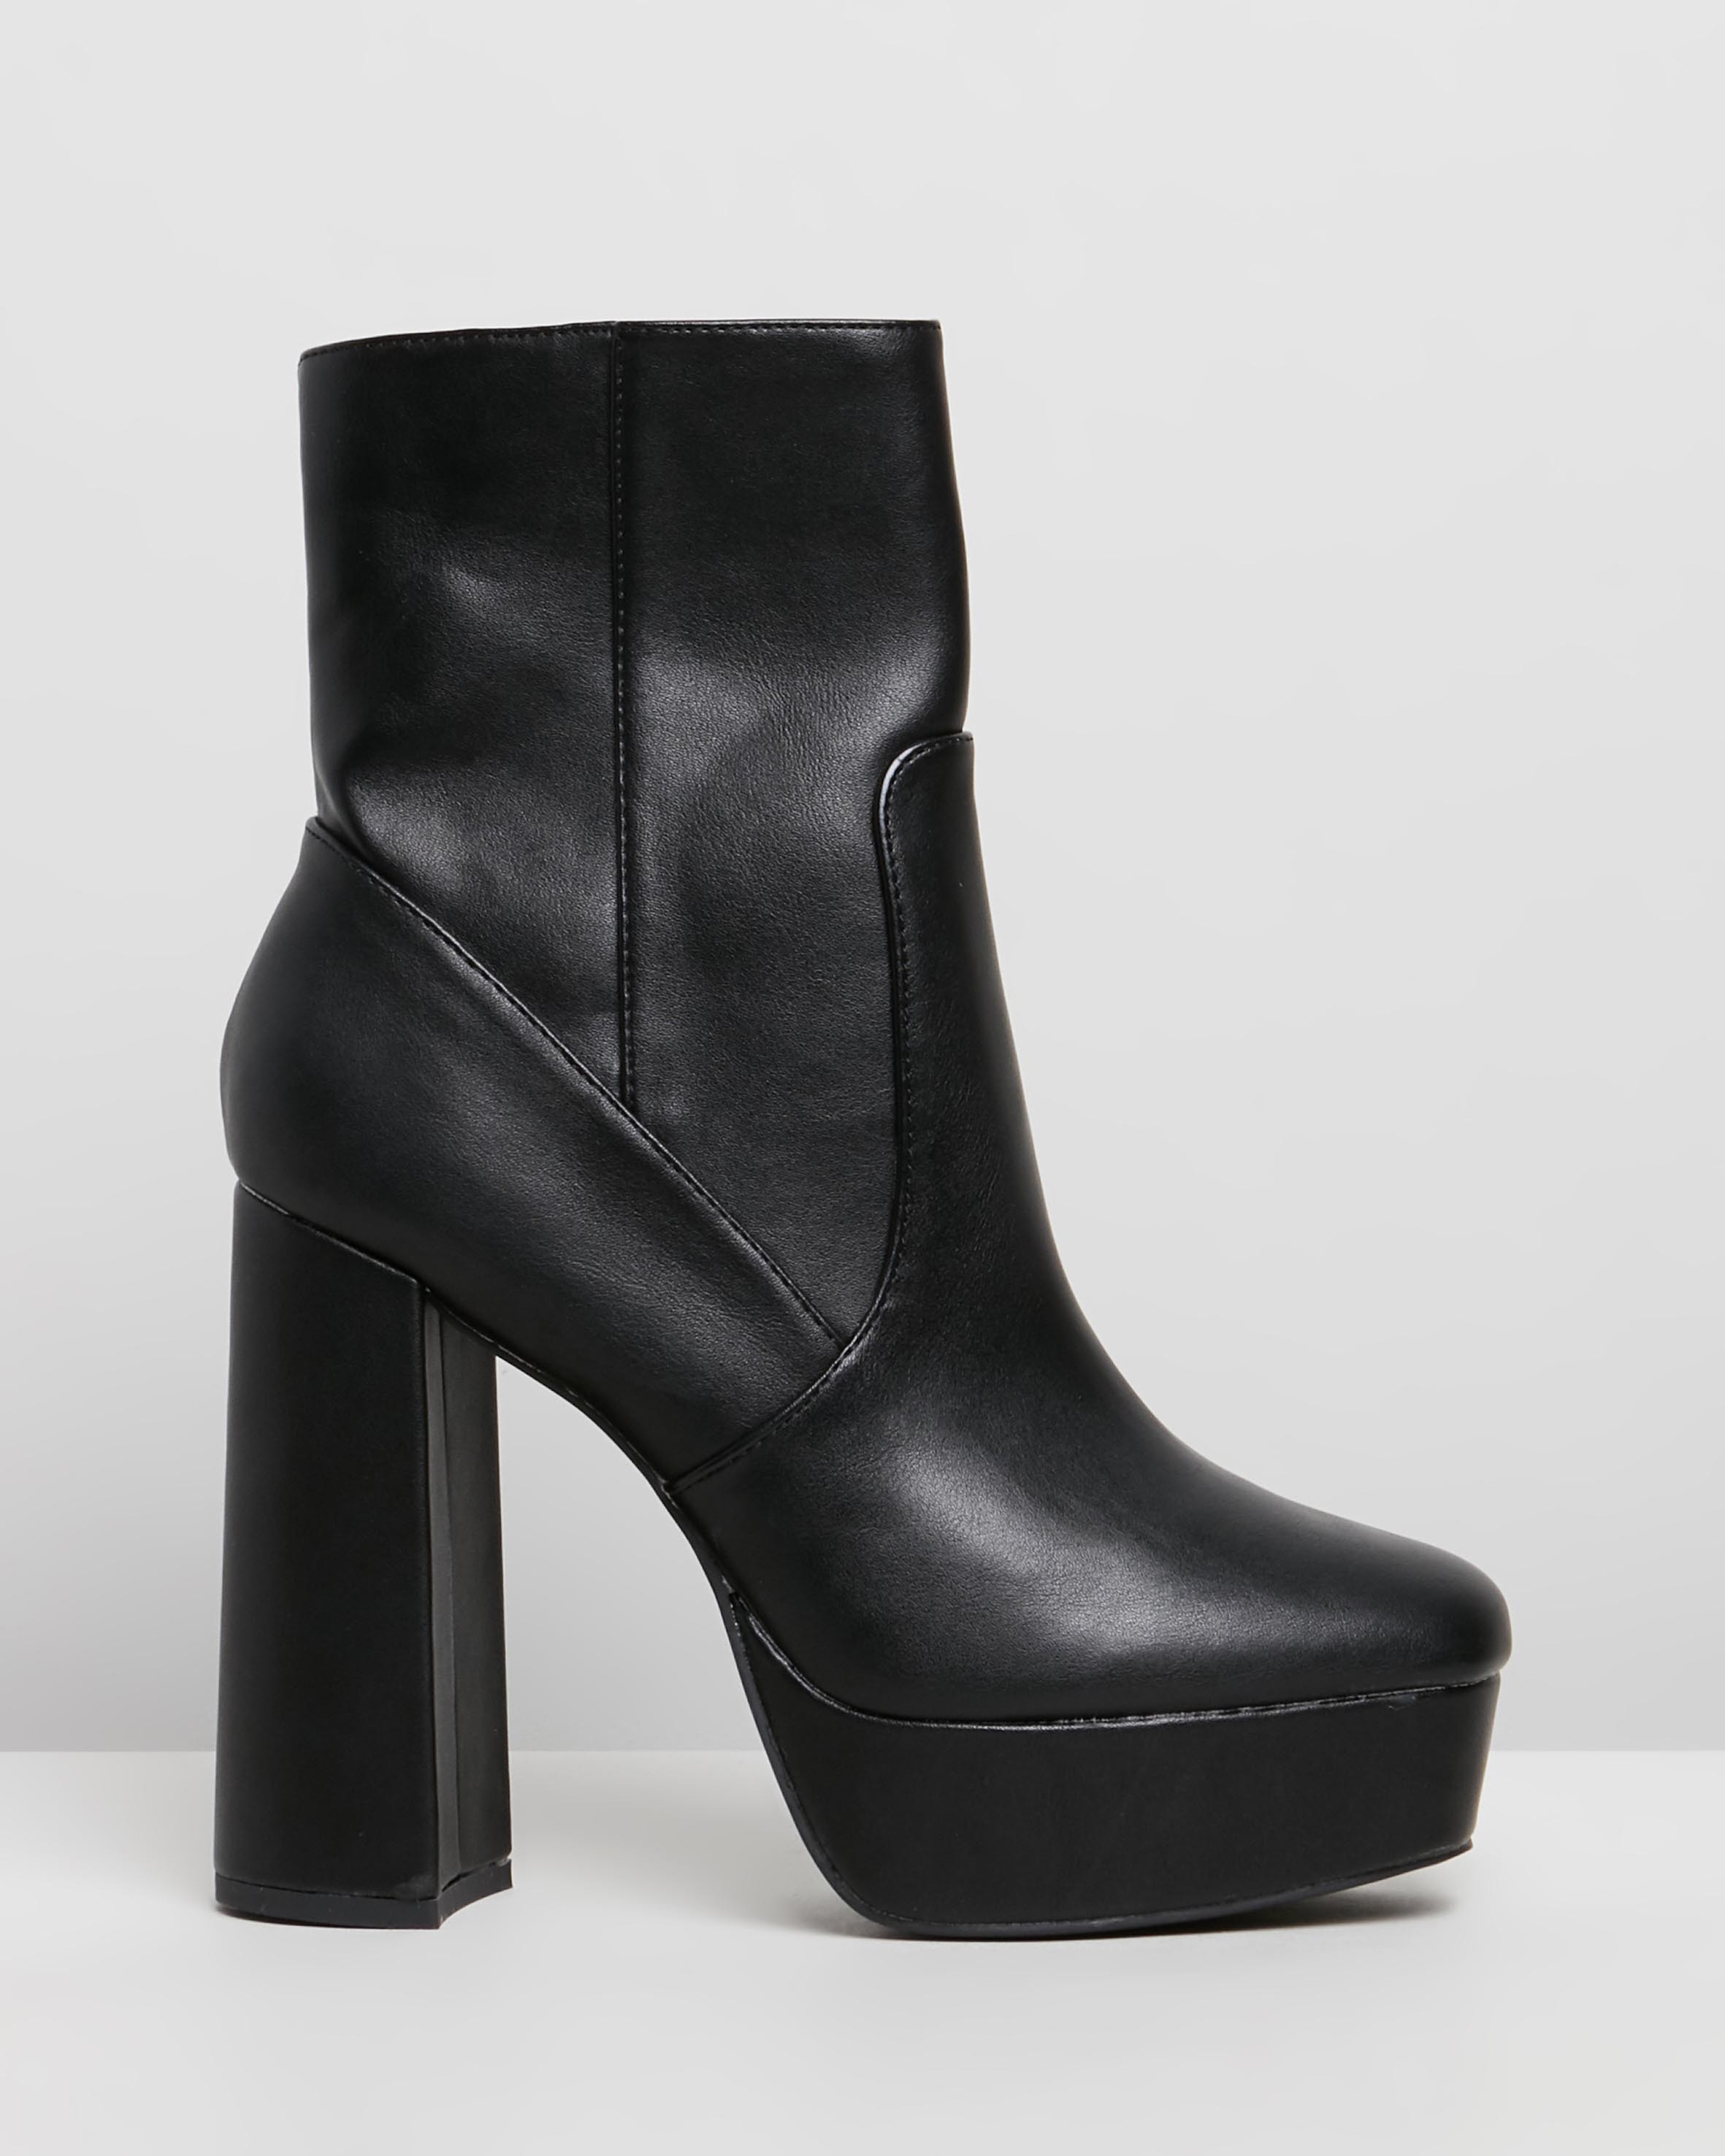 Petra Boots Black Smooth by Spurr | ShoeSales